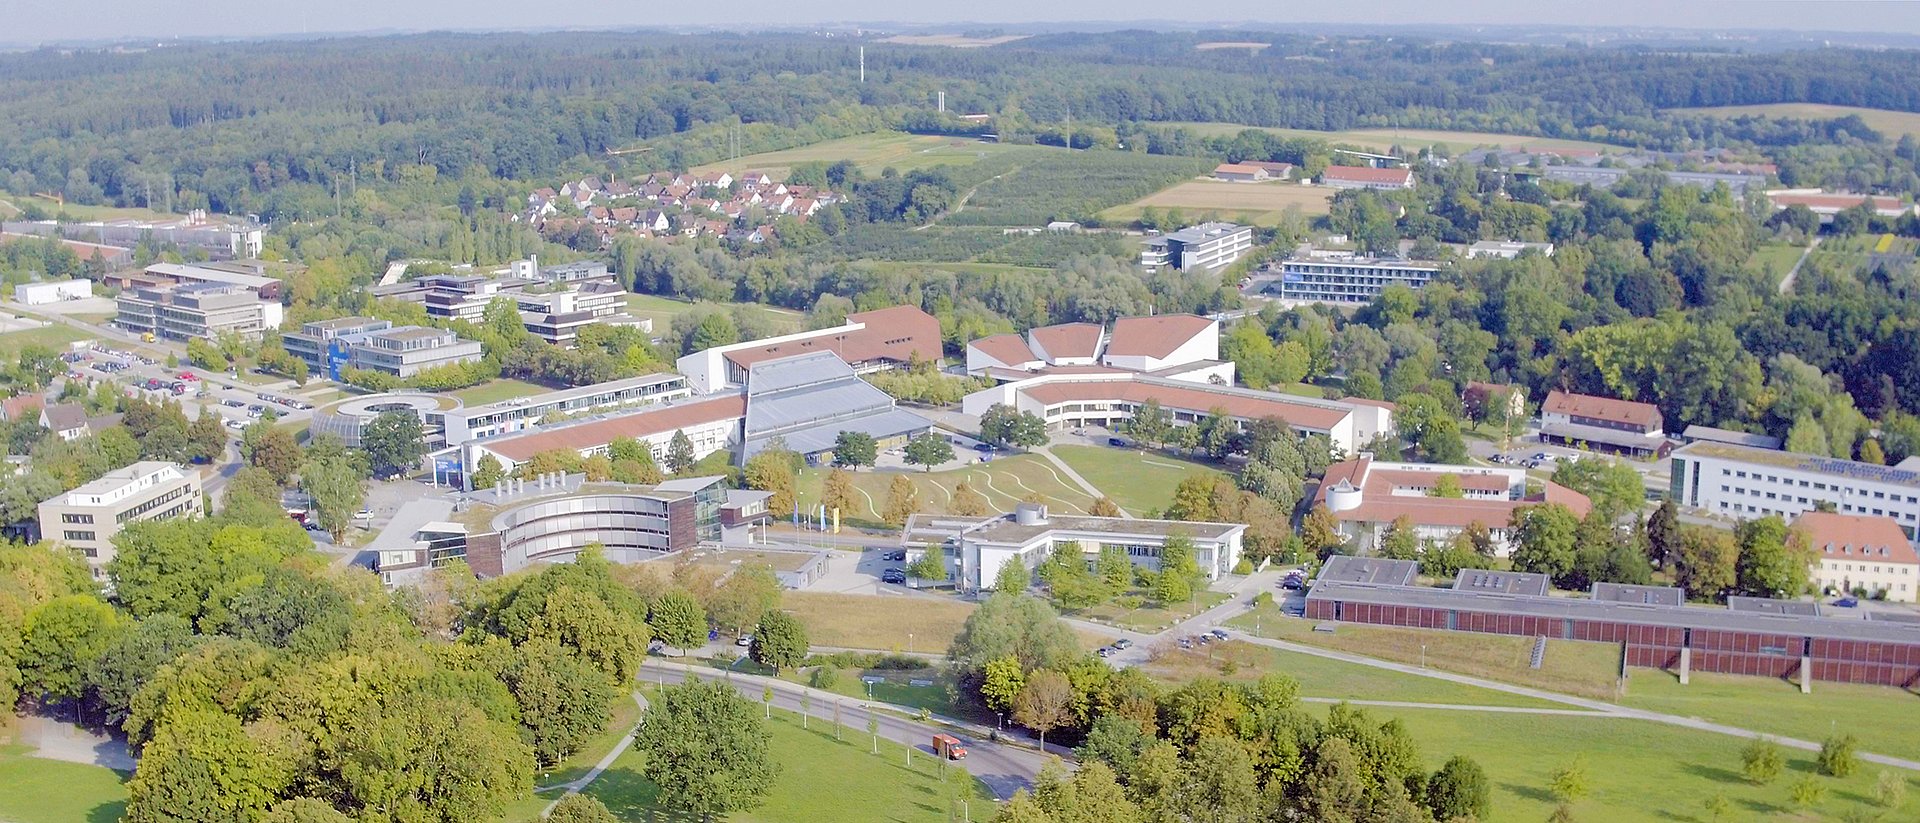 Aerial photo of the Weihenstephan campus